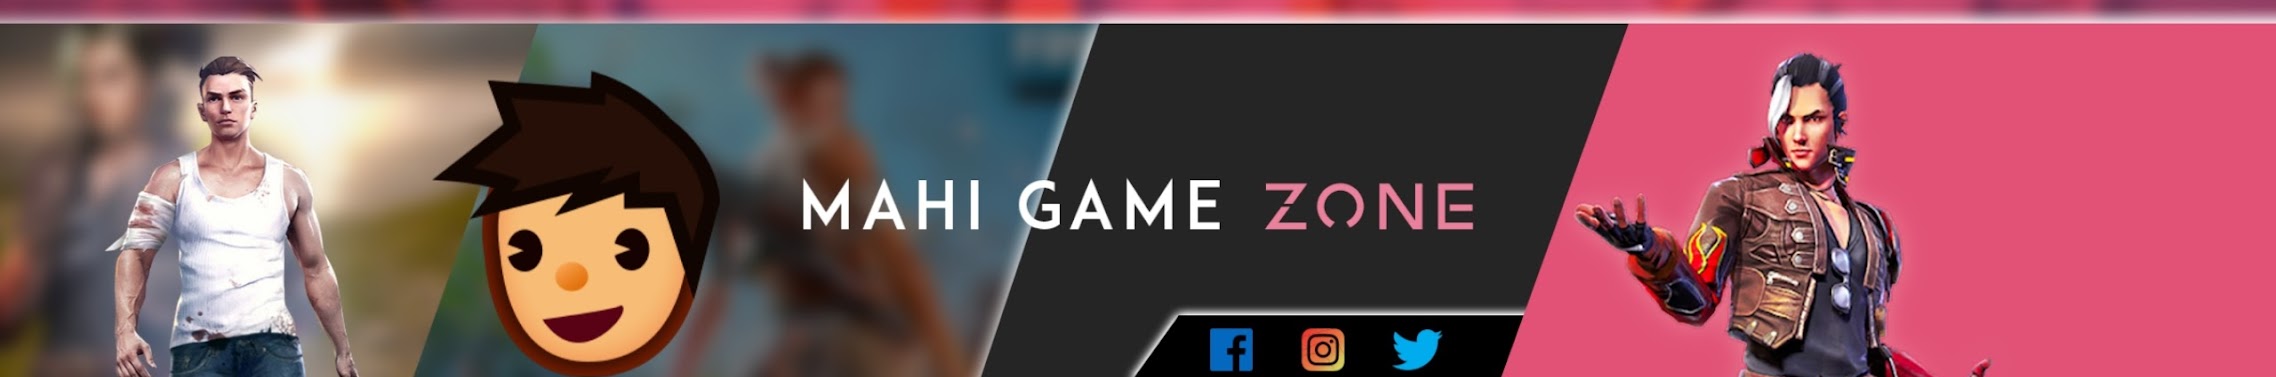 Mahi Game Zone Youtube Channel Analytics And Report Powered By Noxinfluencer Mobile